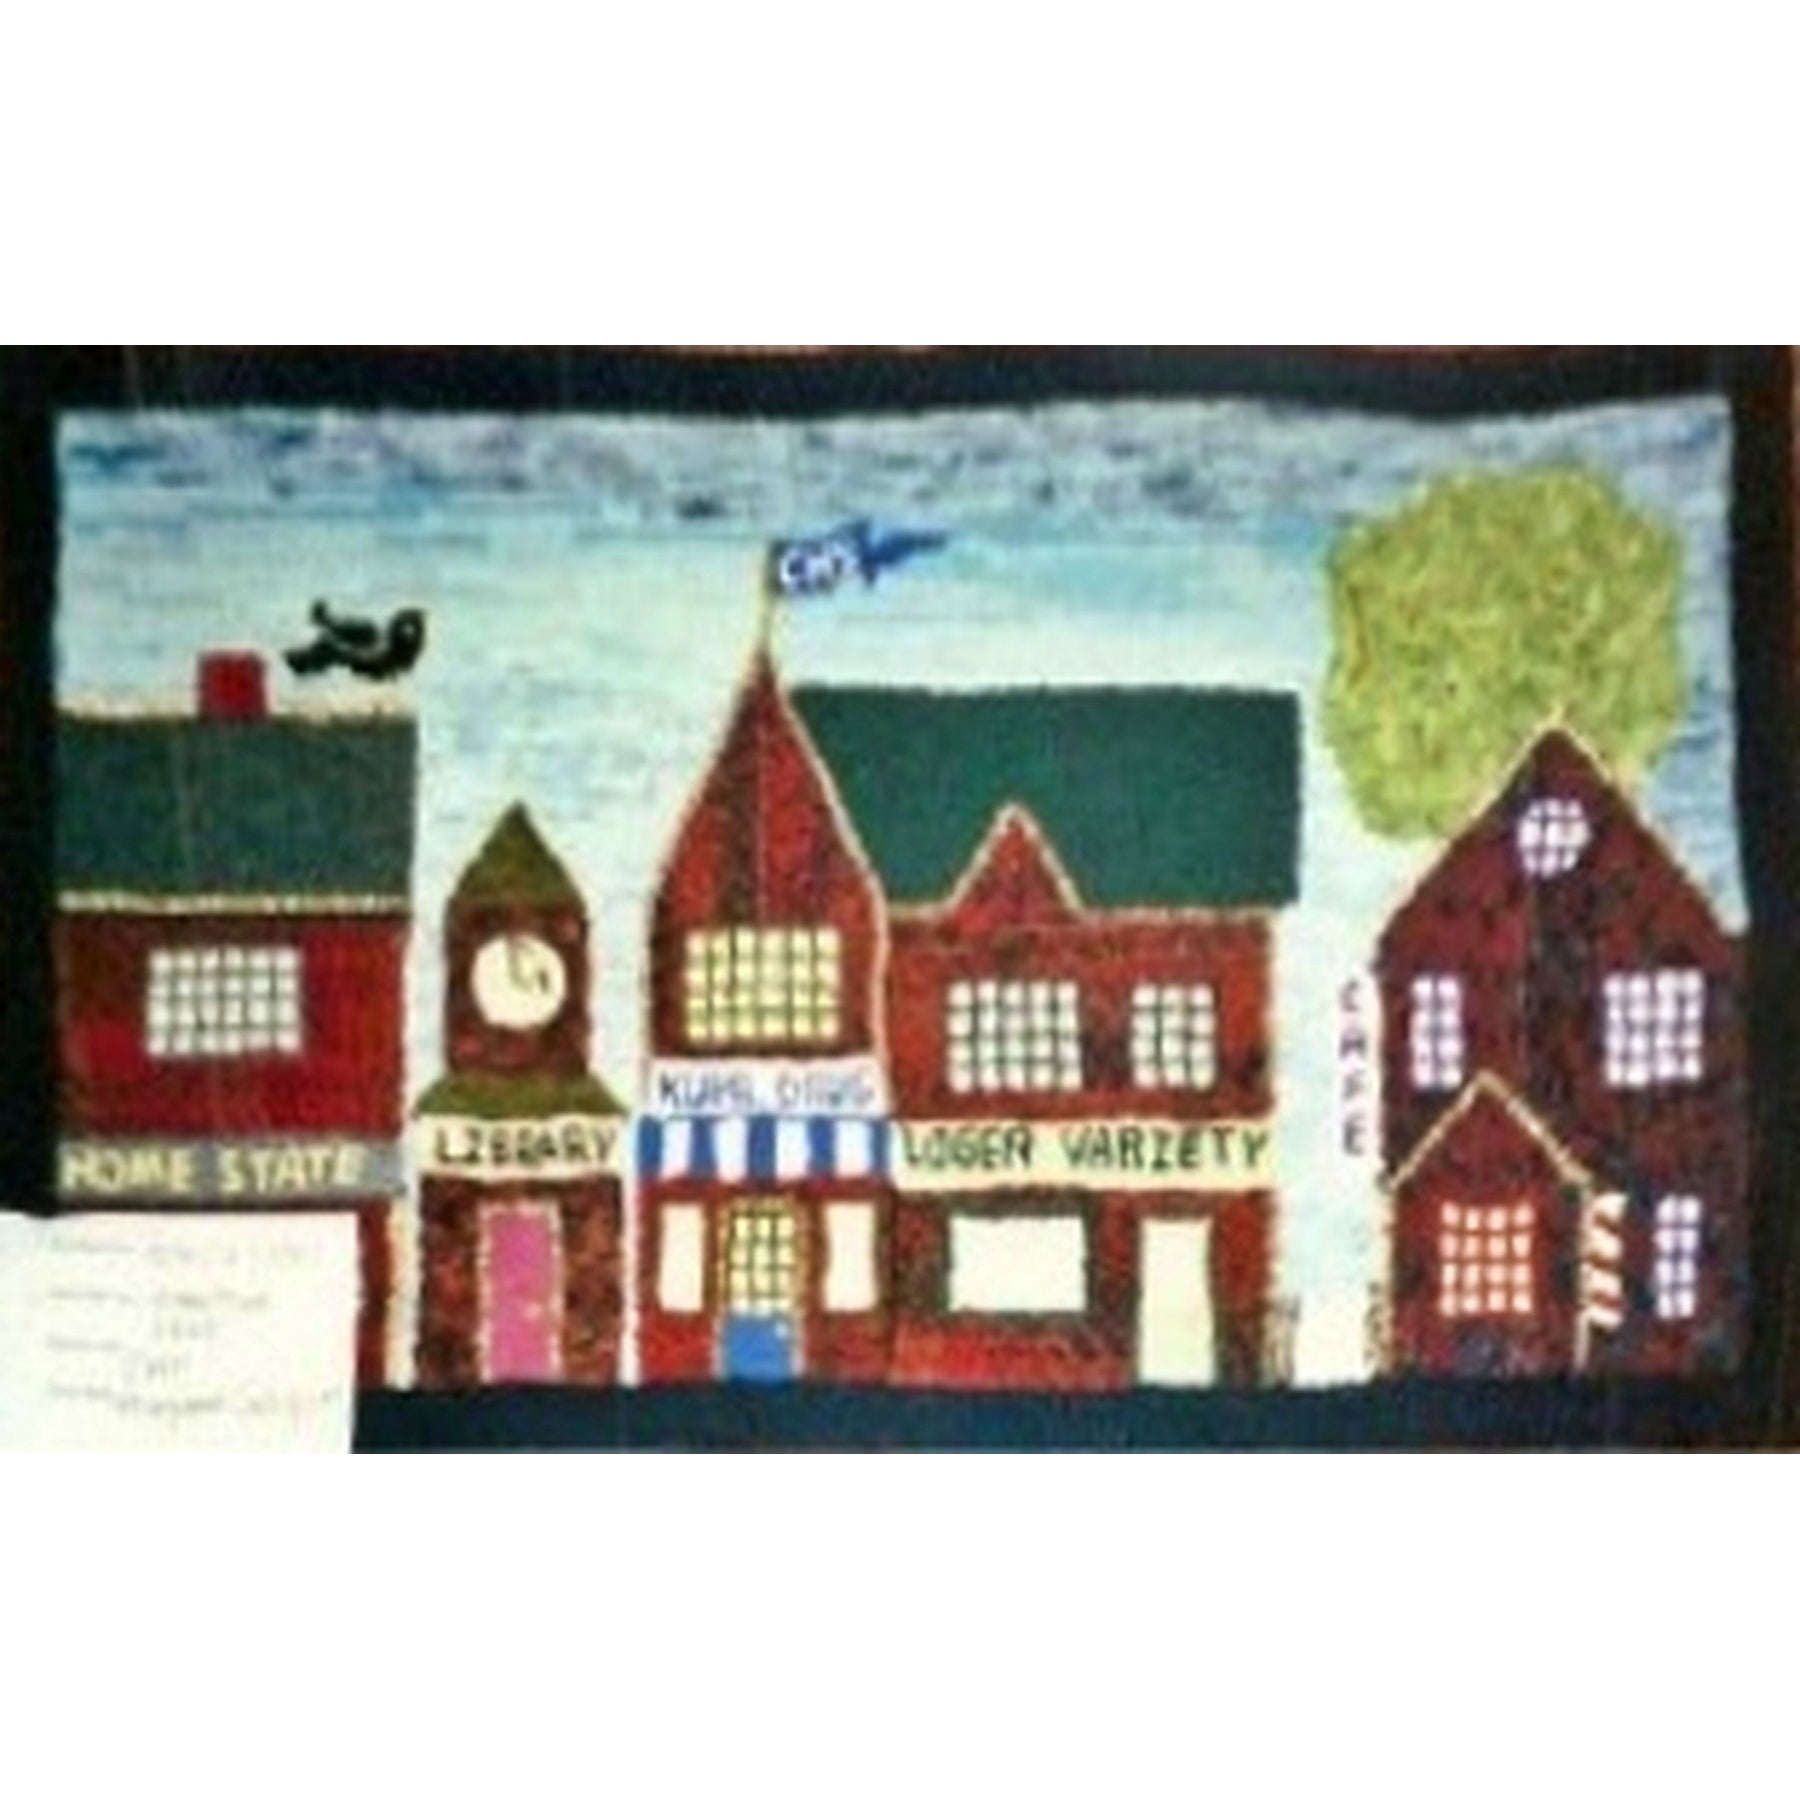 Hometown USA, rug hooked by Patricia Yates